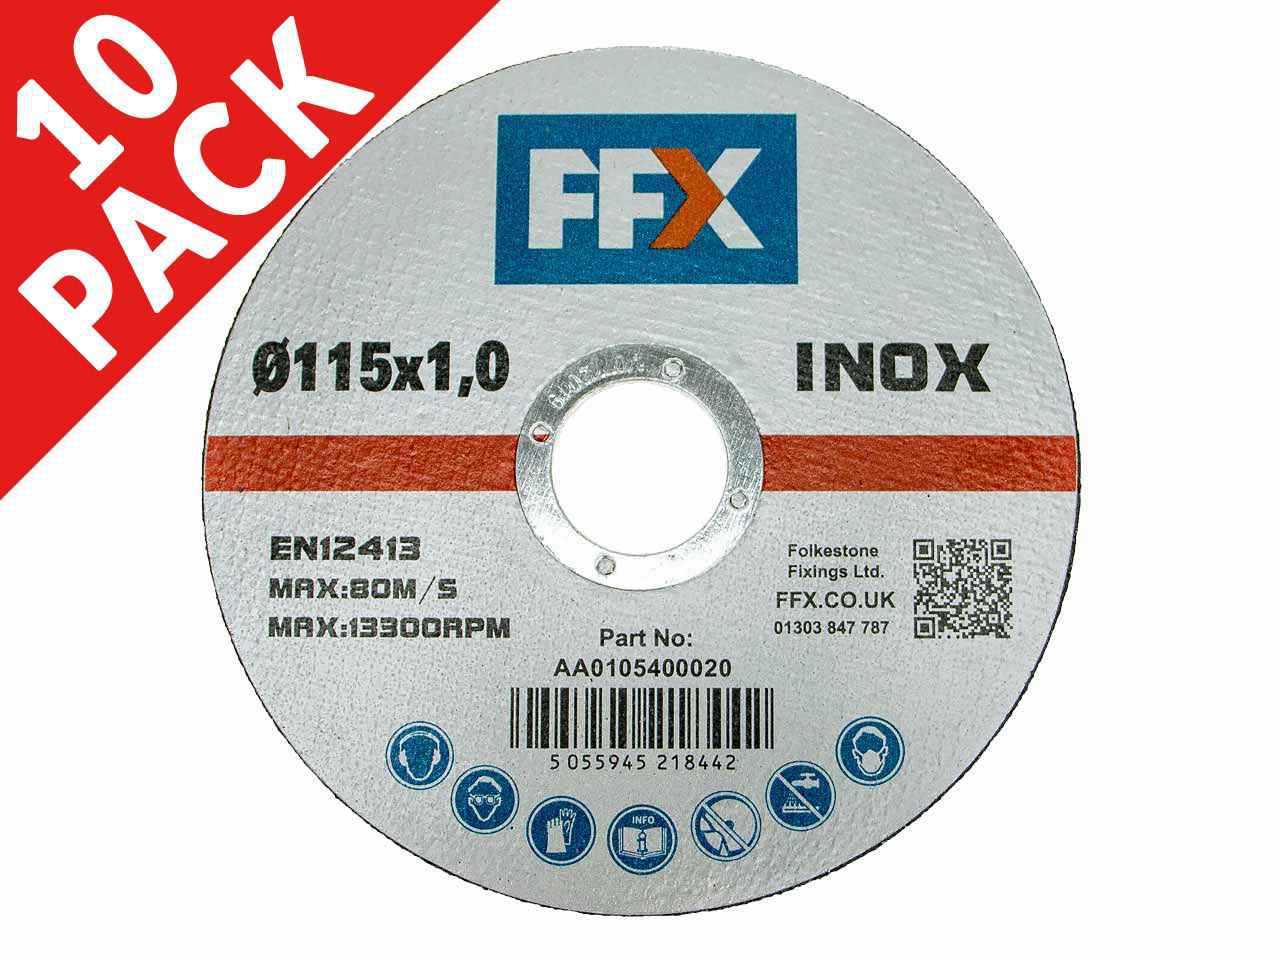 Pack of 10 5 inch X 1mm METAL CUTTING DISC ULTRA THIN